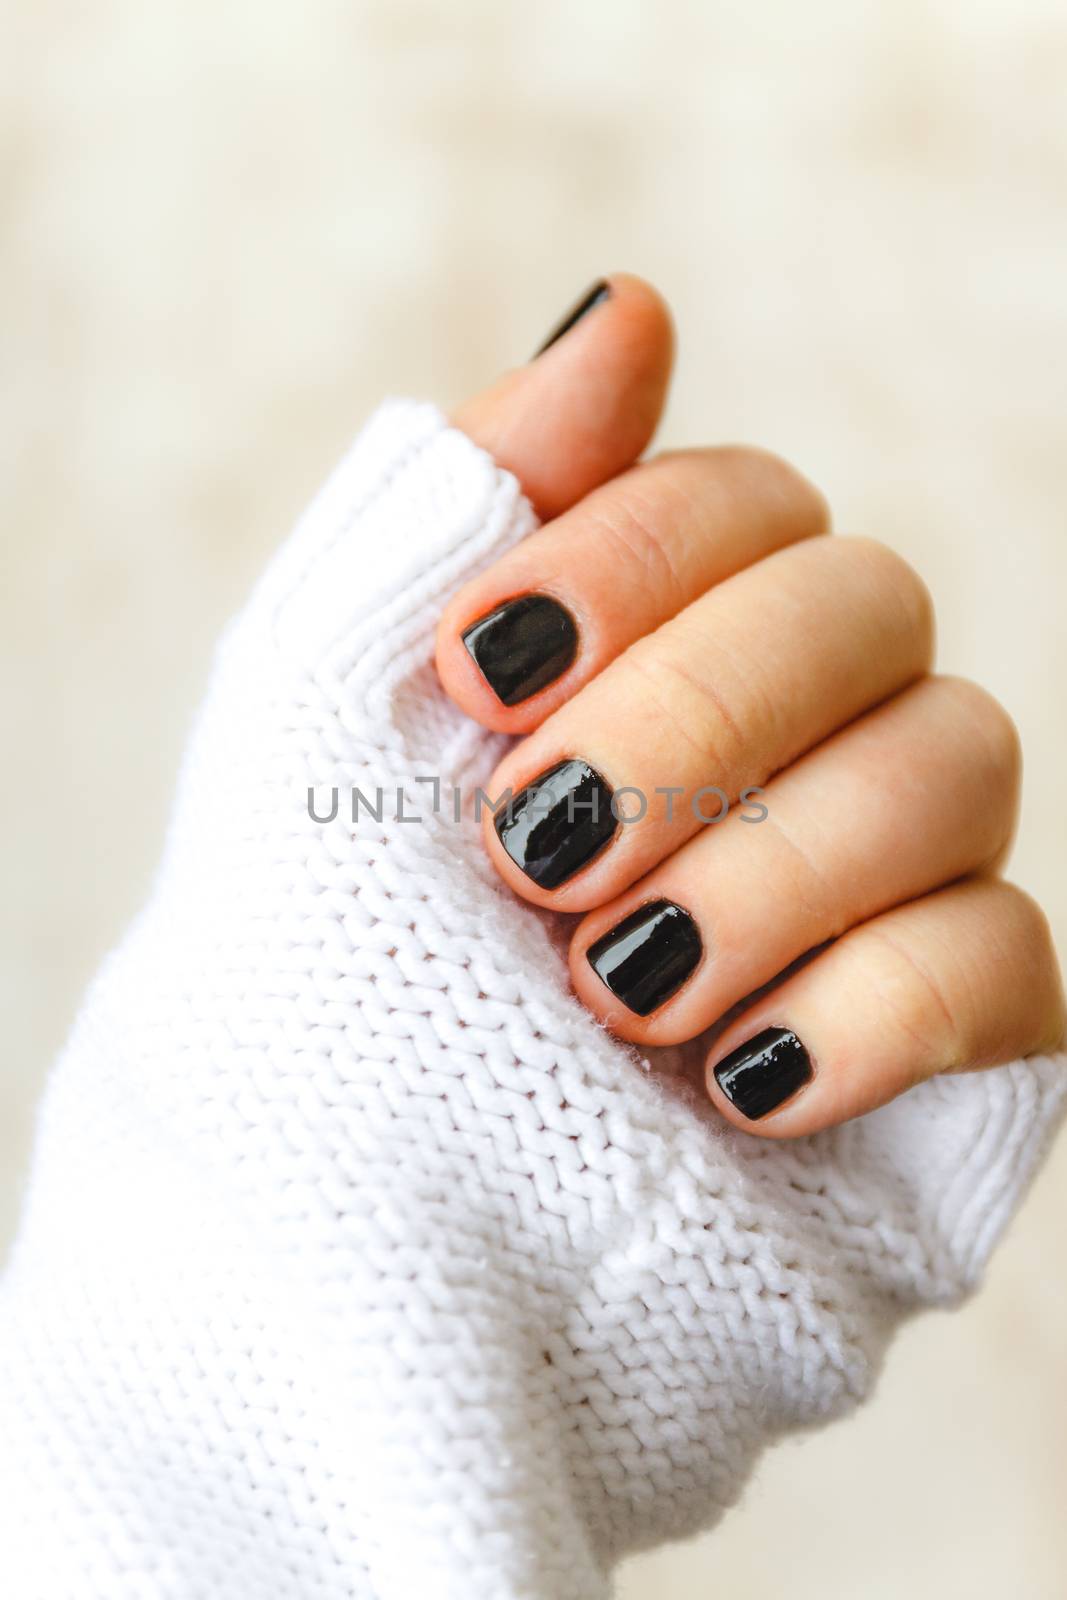 hand with black manicure on short nails in a white sweater on a light background. The concept of a stylish and warm winter.